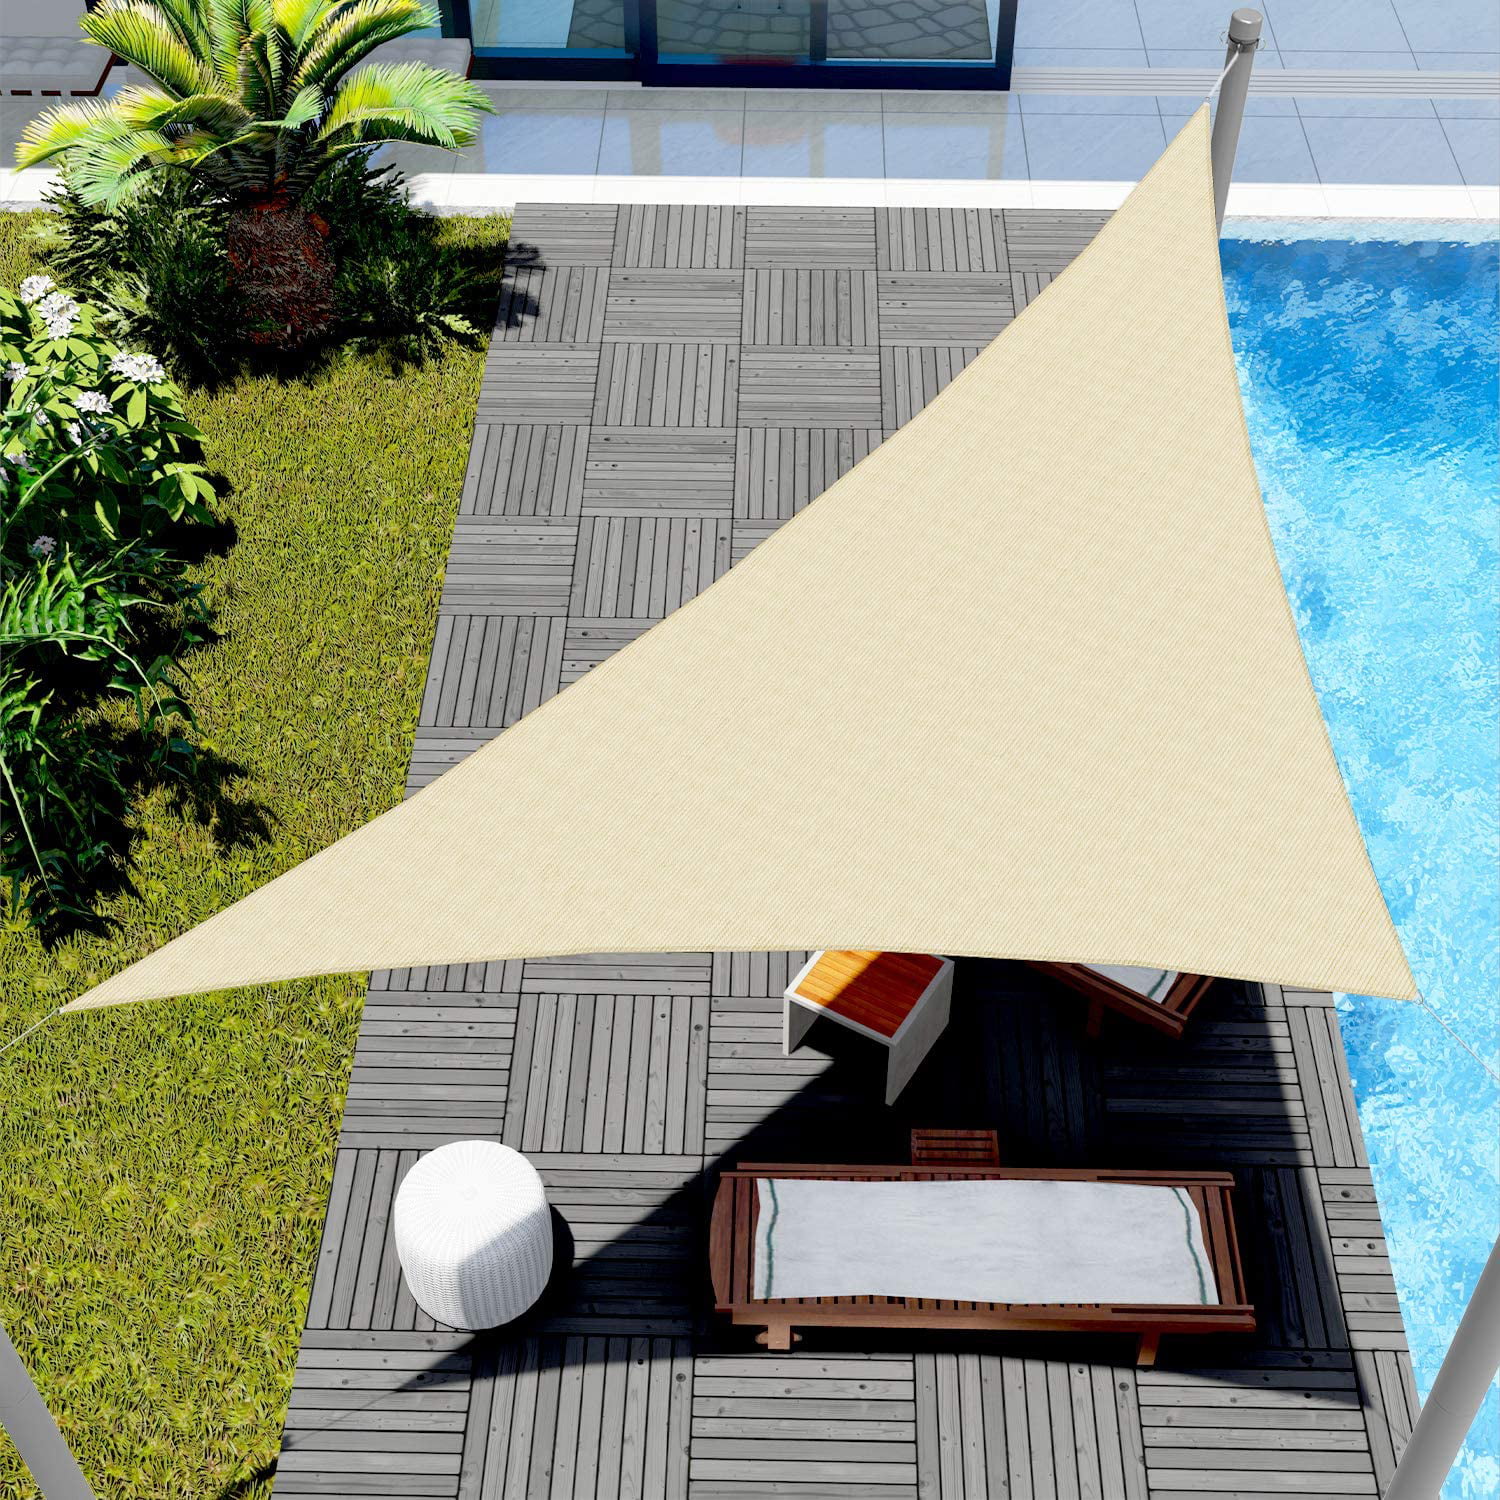 14*14*14ft Triangle Sun Shade Sail Canopy UV Block For Outdoor&Activities US 